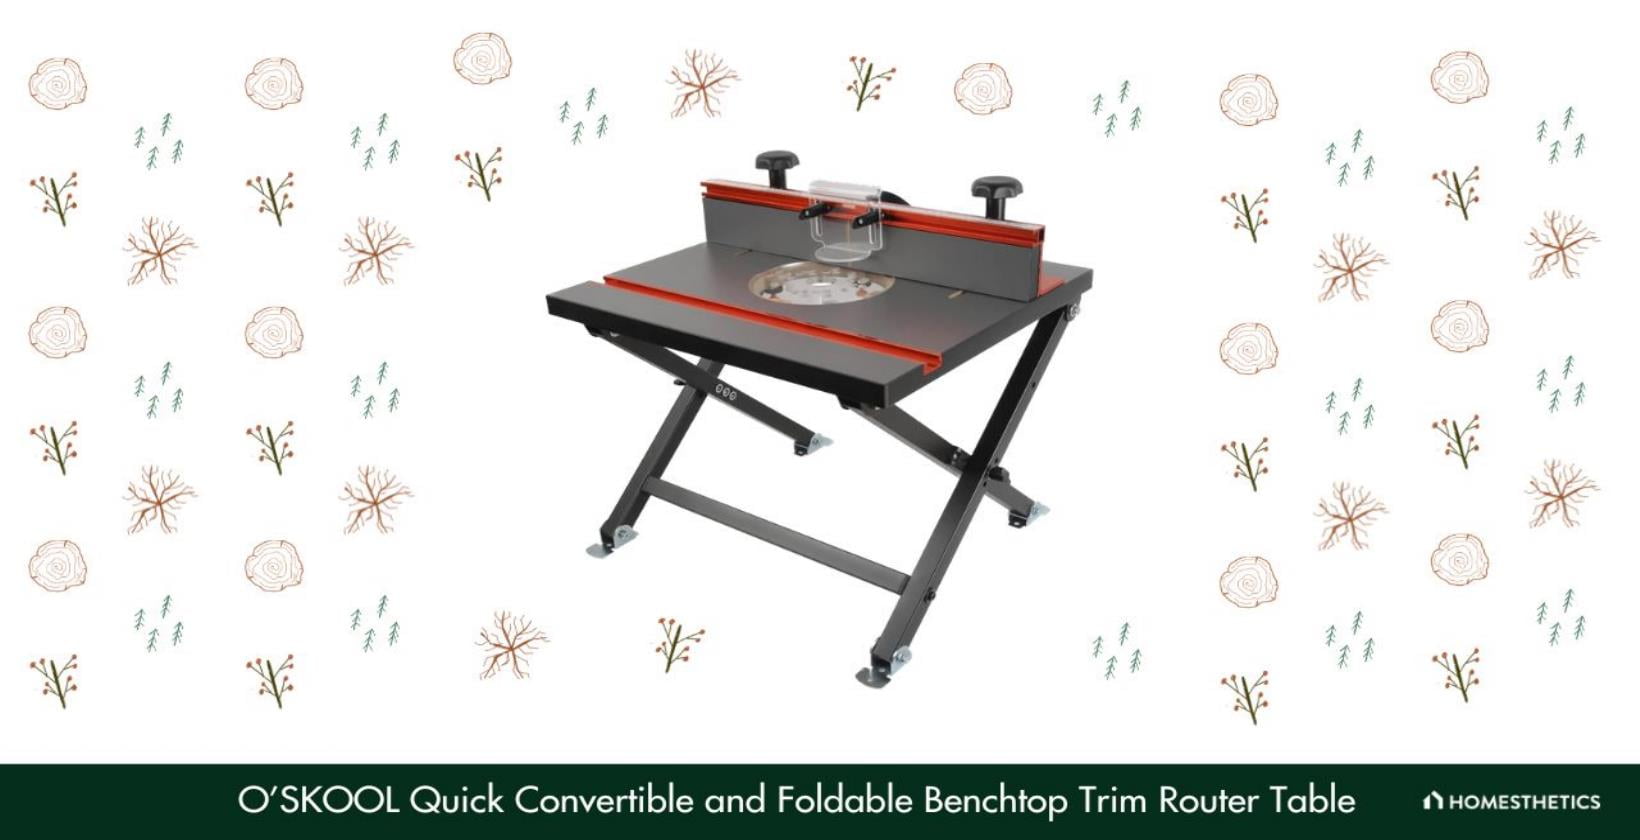 11. OSKOOL Quick Convertible and Foldable Benchtop Trim Router Table